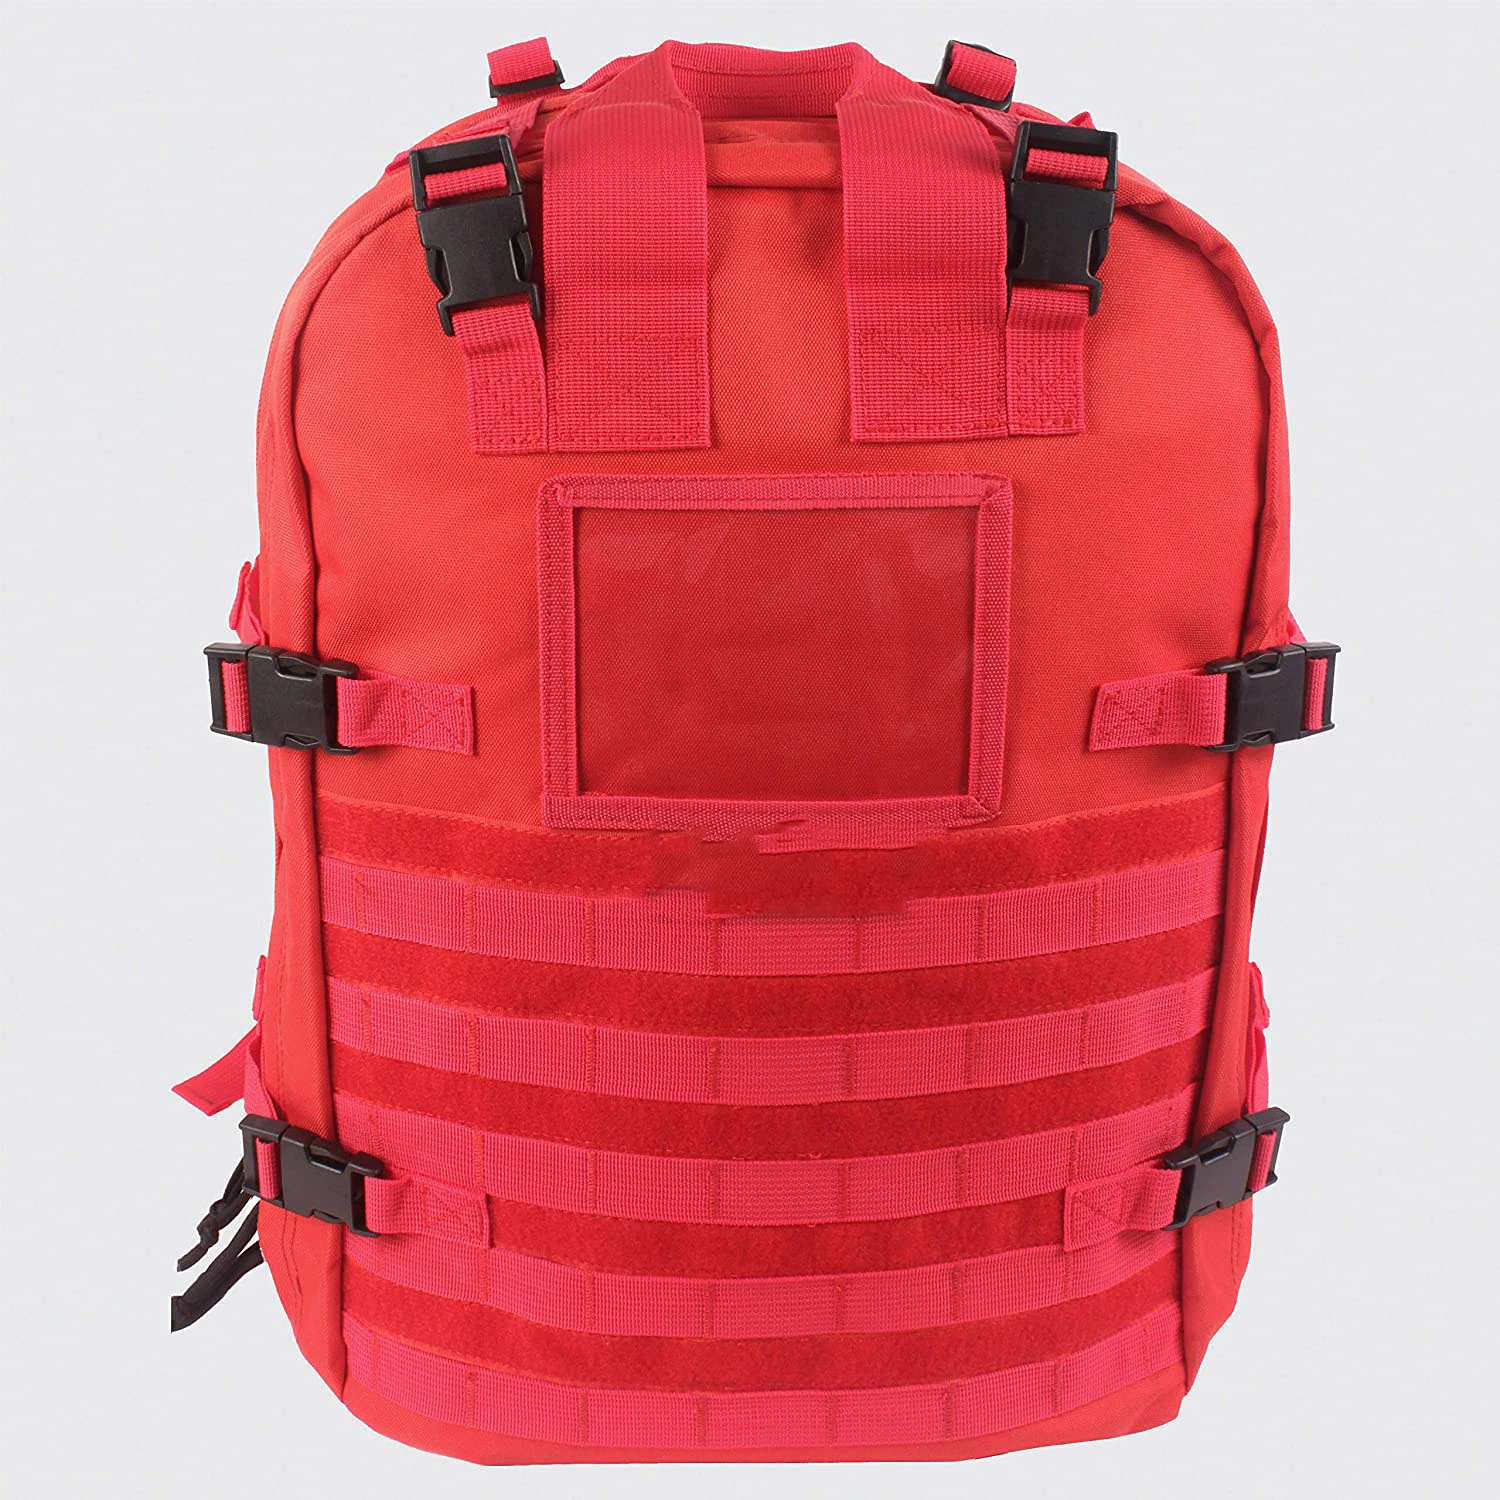 Large Capacity Tactical Field Medical Stomp Backpack Bag Red First Aid Kit Bag Emergency Medical Trauma Bag for Traveling Car Home Camping Office Hiking Outdoor